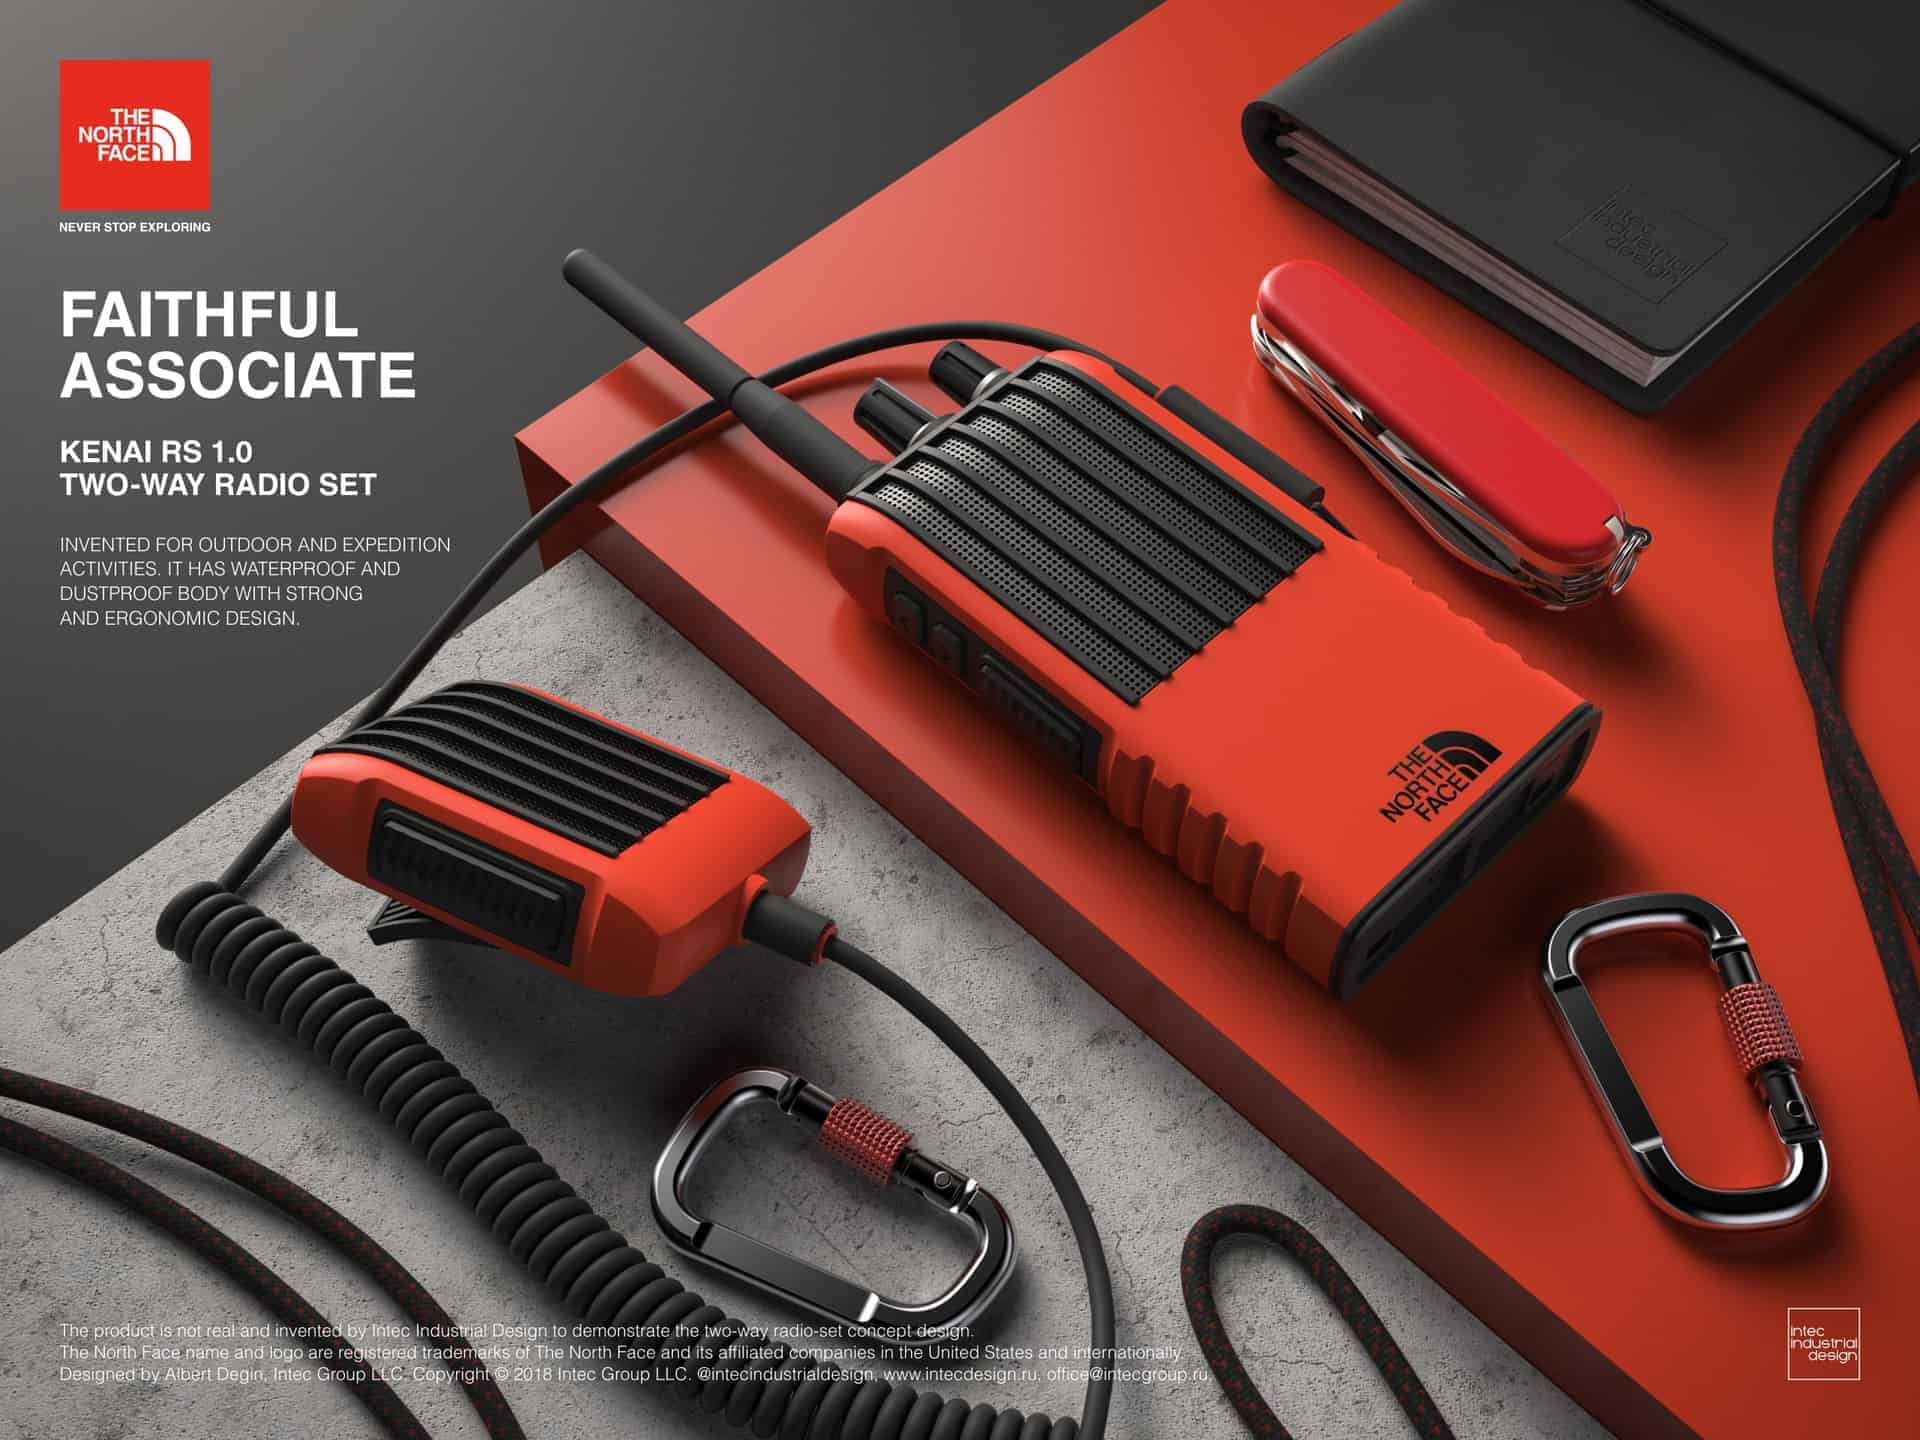 The North Face two-way radio set concept